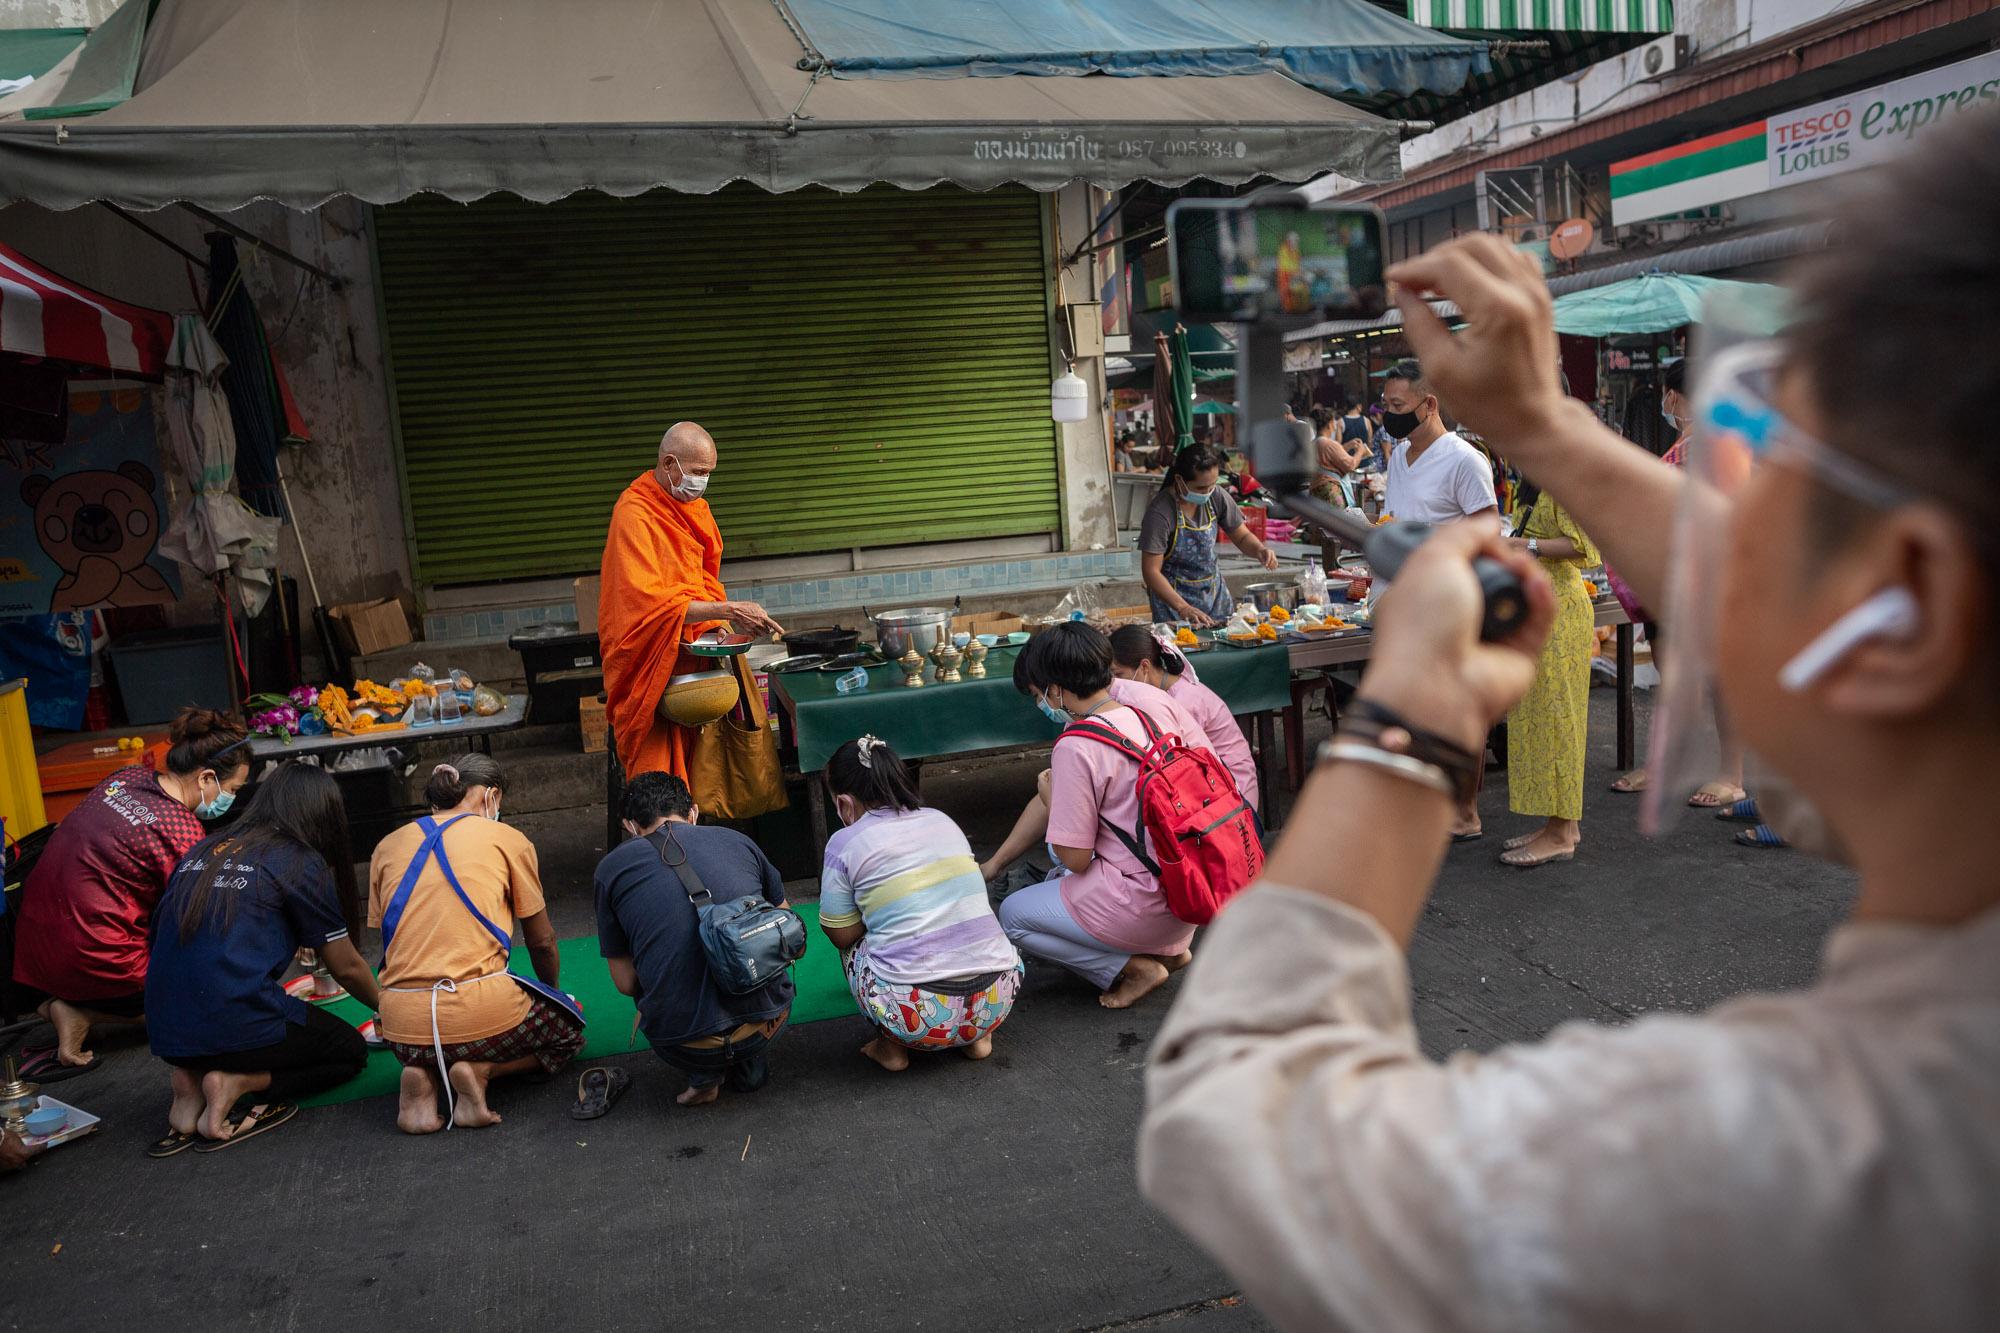 Hnoi Latthitham, 53, shows participants of a virtual tour an example of alms offering to a Buddhist monk at Chai Chimplee Temple Market in Bangkok,...